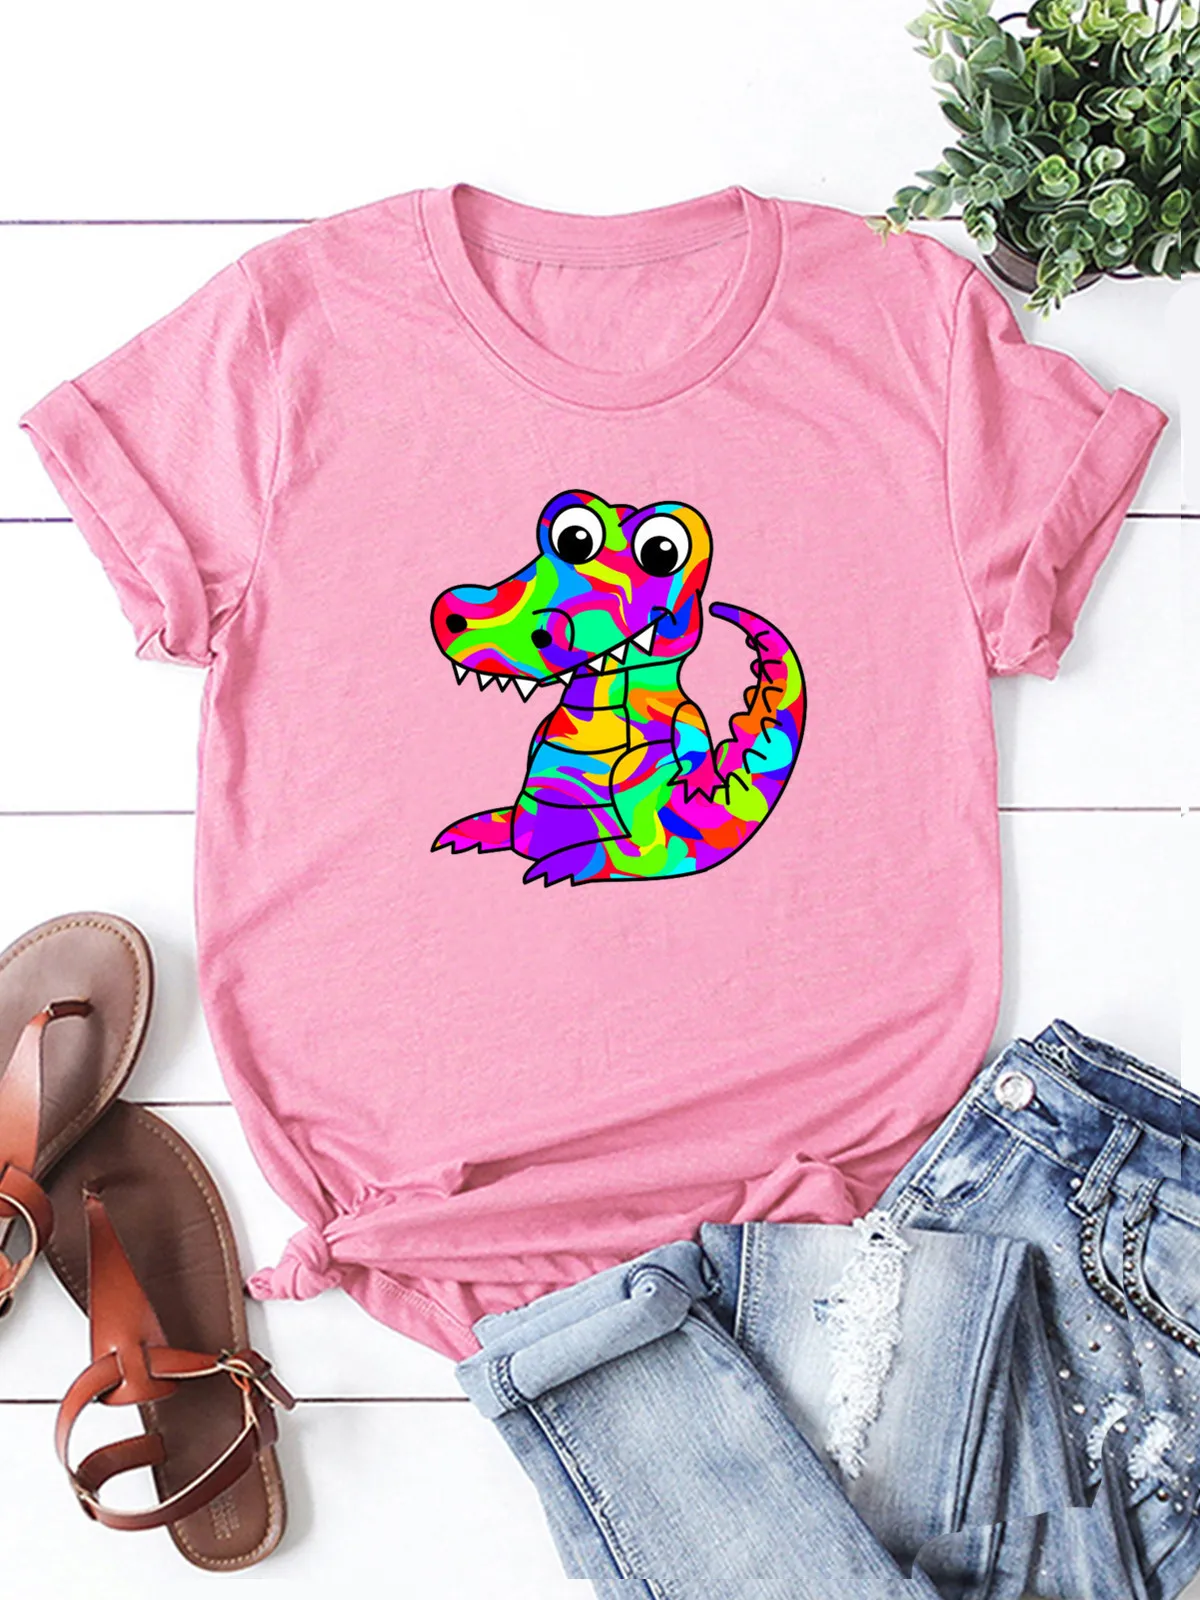 Hot Selling Funny Dinosaur Pattern Printed Short Sleeve T-shirt Women's Fashion Casual Crewneck Girl T-shirts Aesthetic Clothes